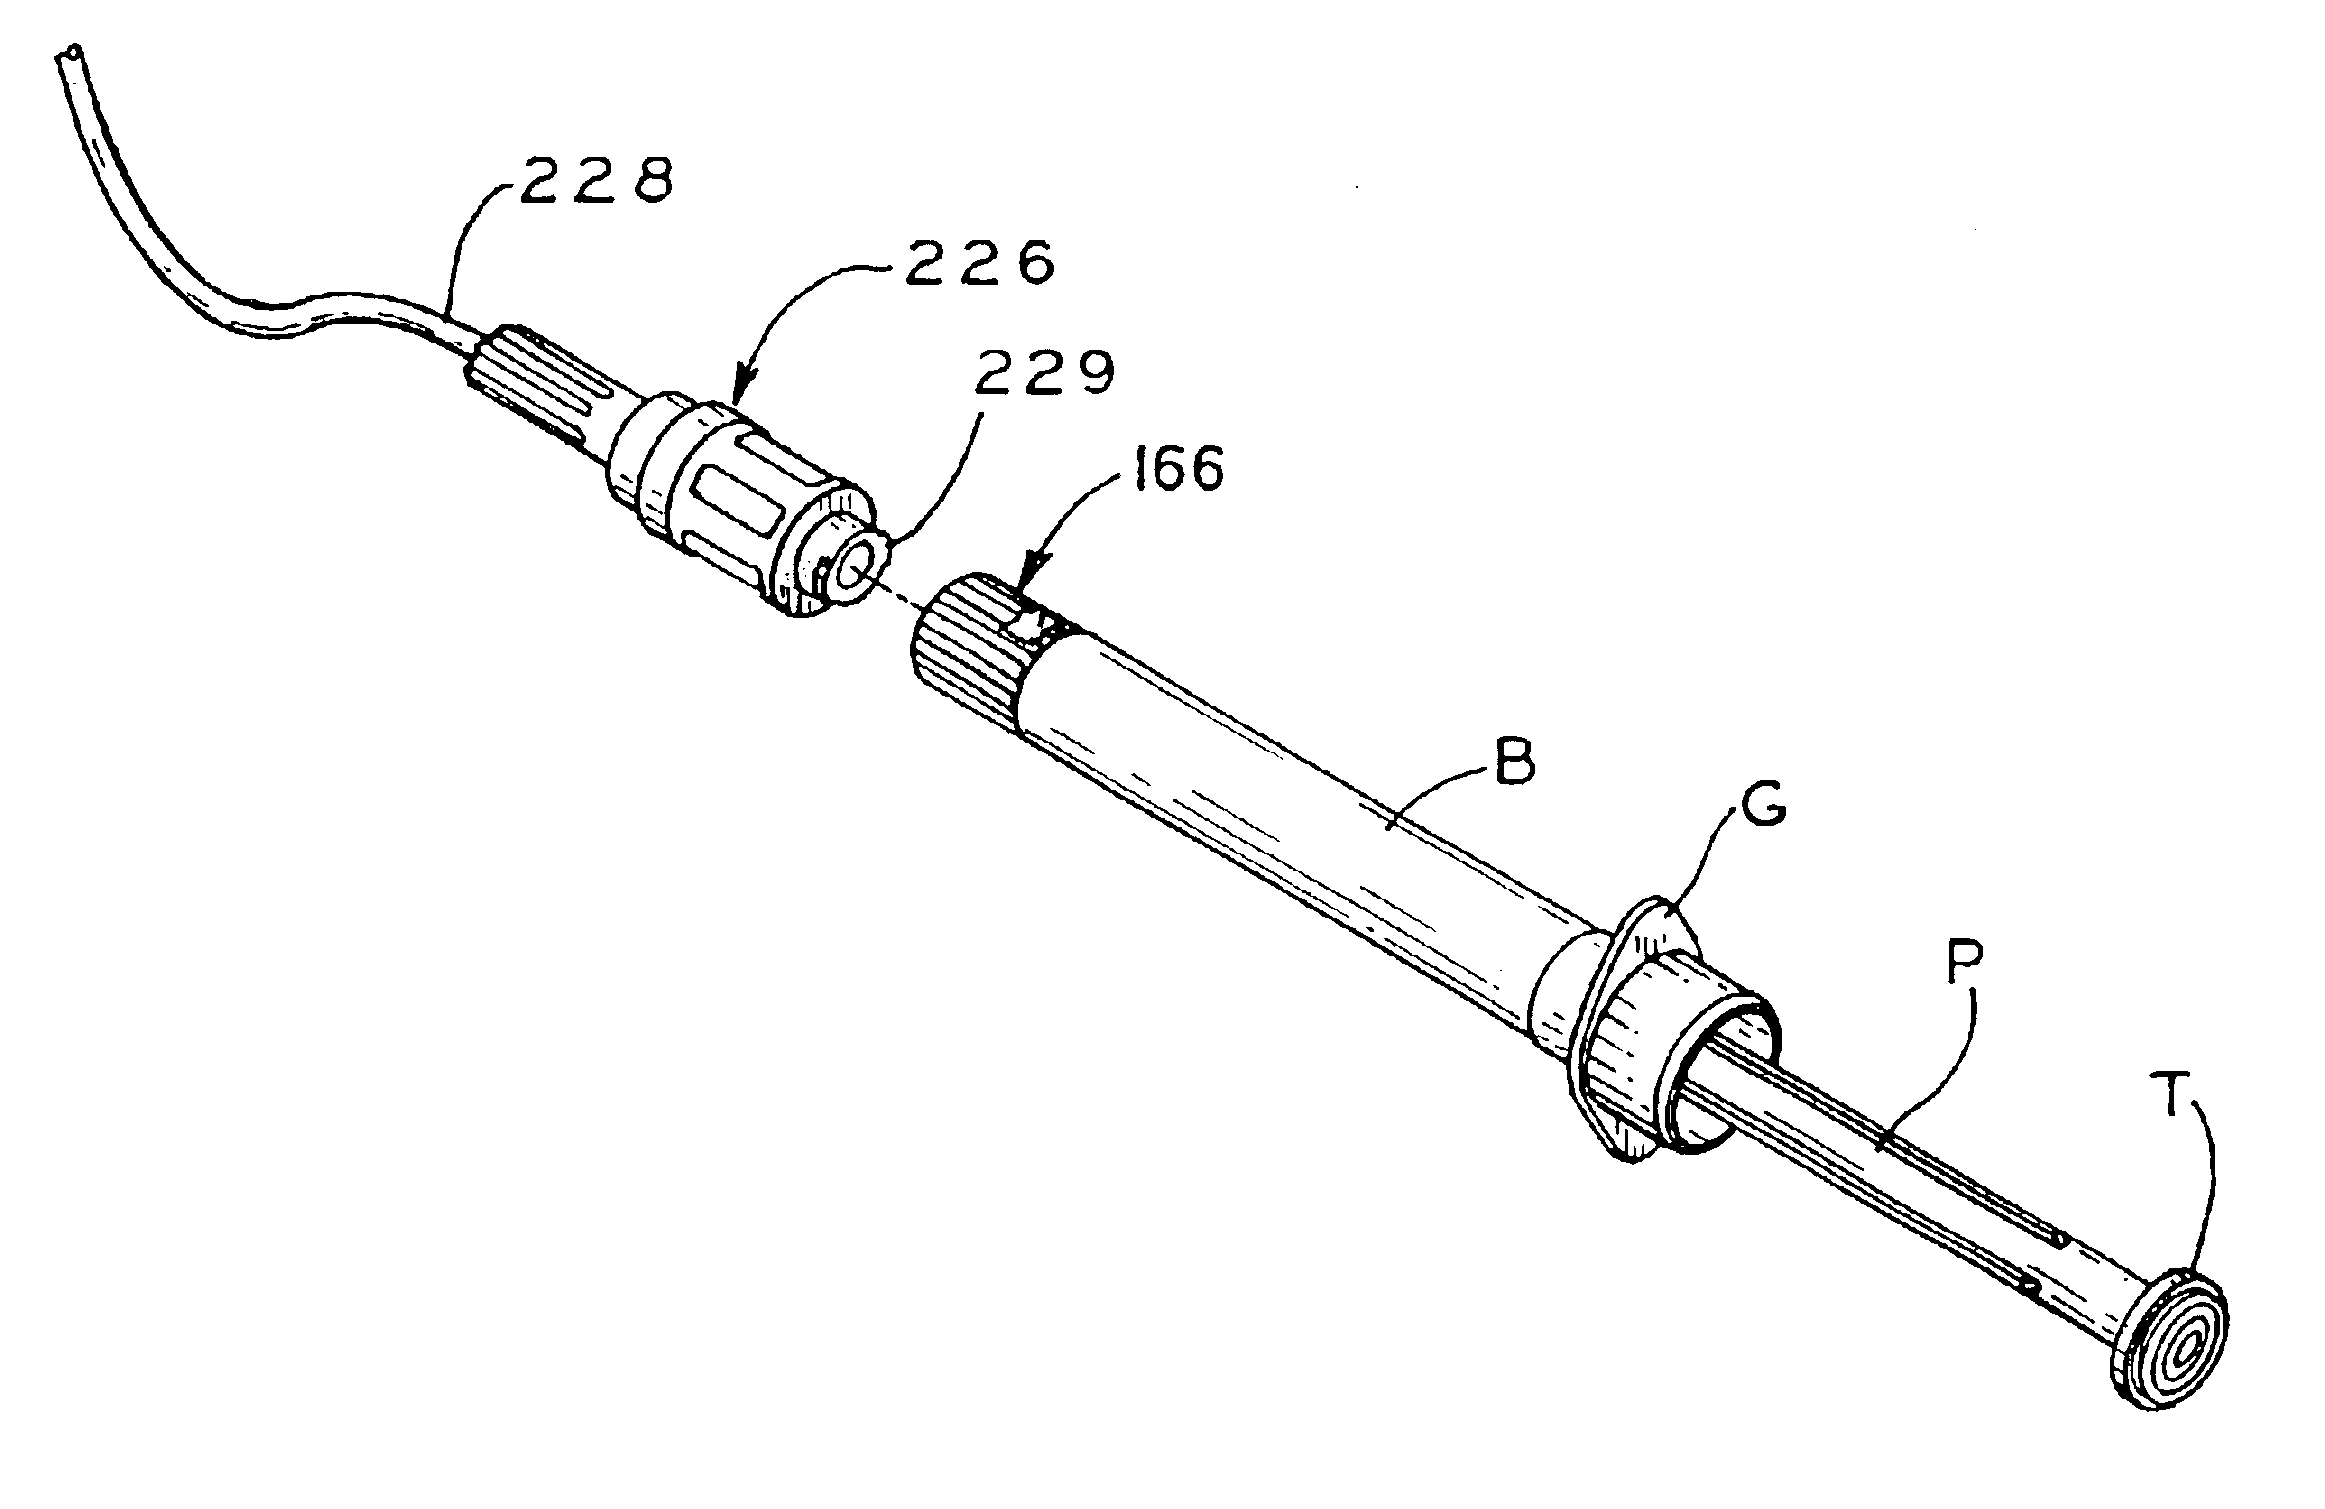 Retractable needle syringe including a sheath and an intravenous adapter